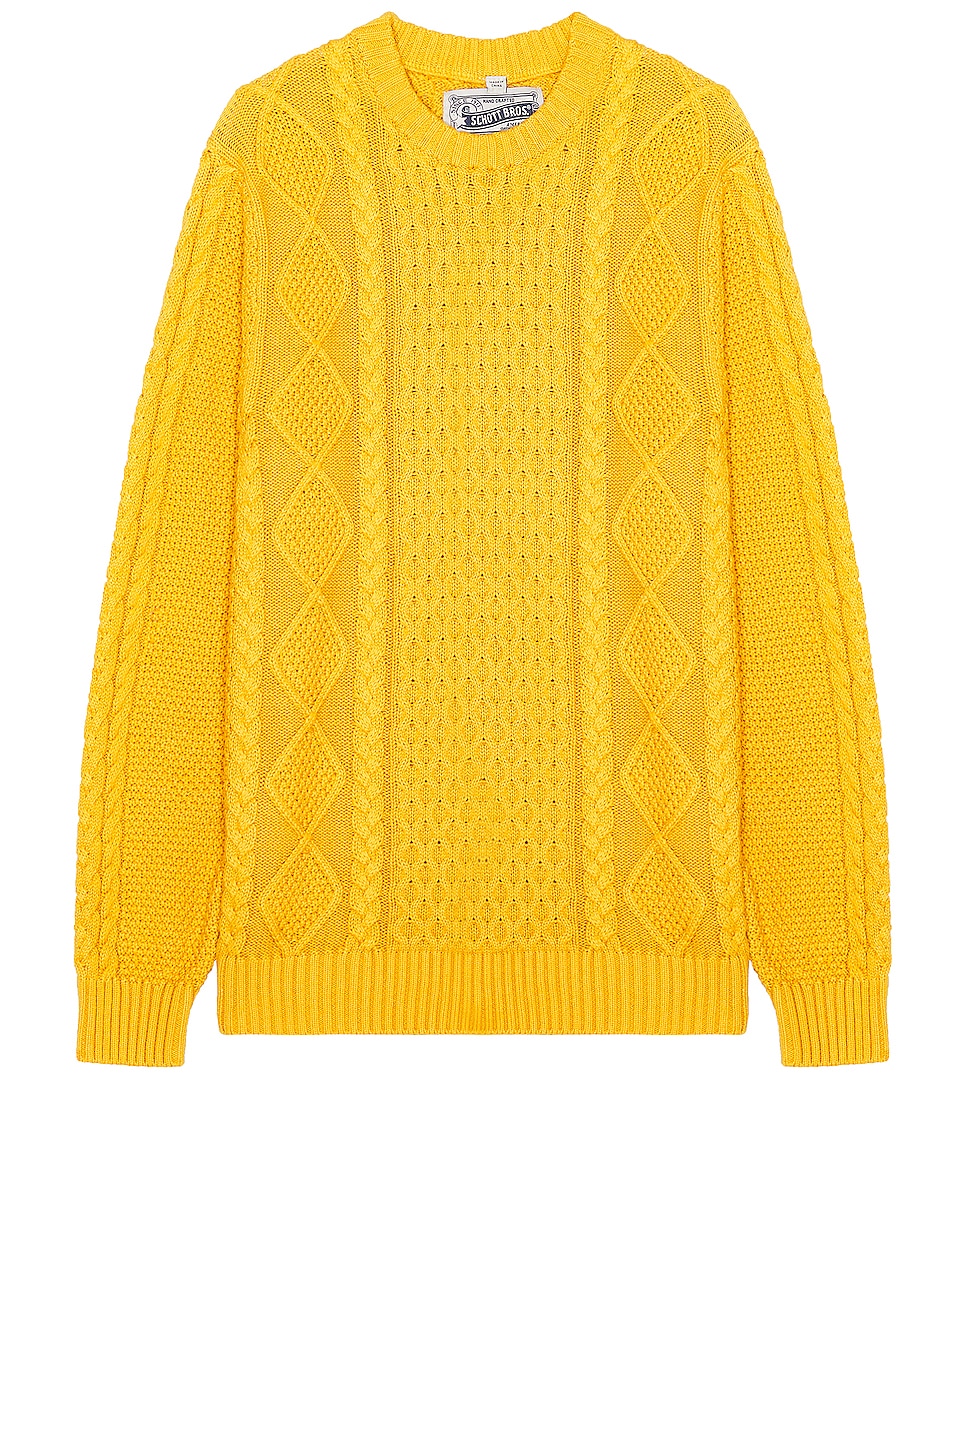 Image 1 of Schott Cableknit Sweater in Sunflower